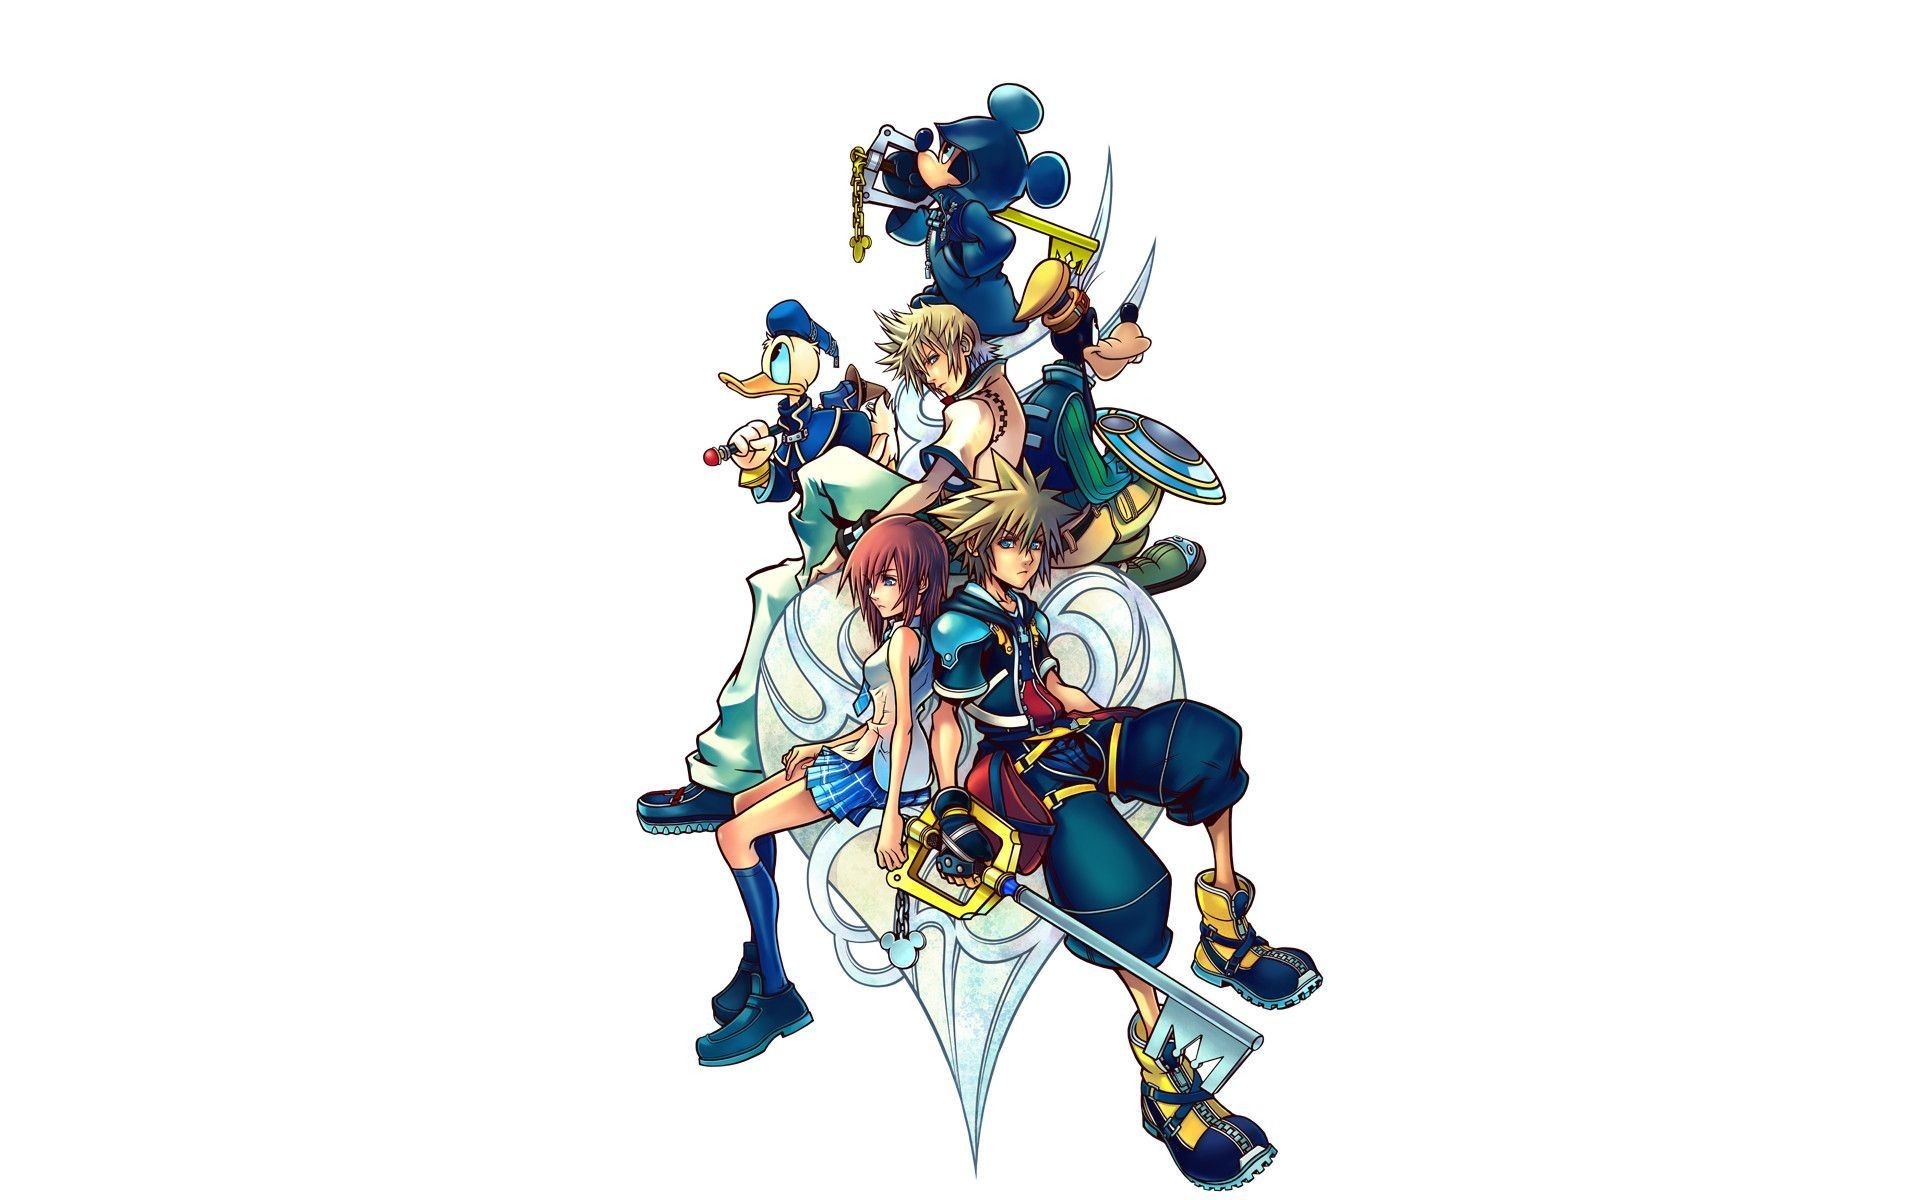 Kingdom Hearts 2 wallpapers, Background pictures, 1920x1200 HD Desktop